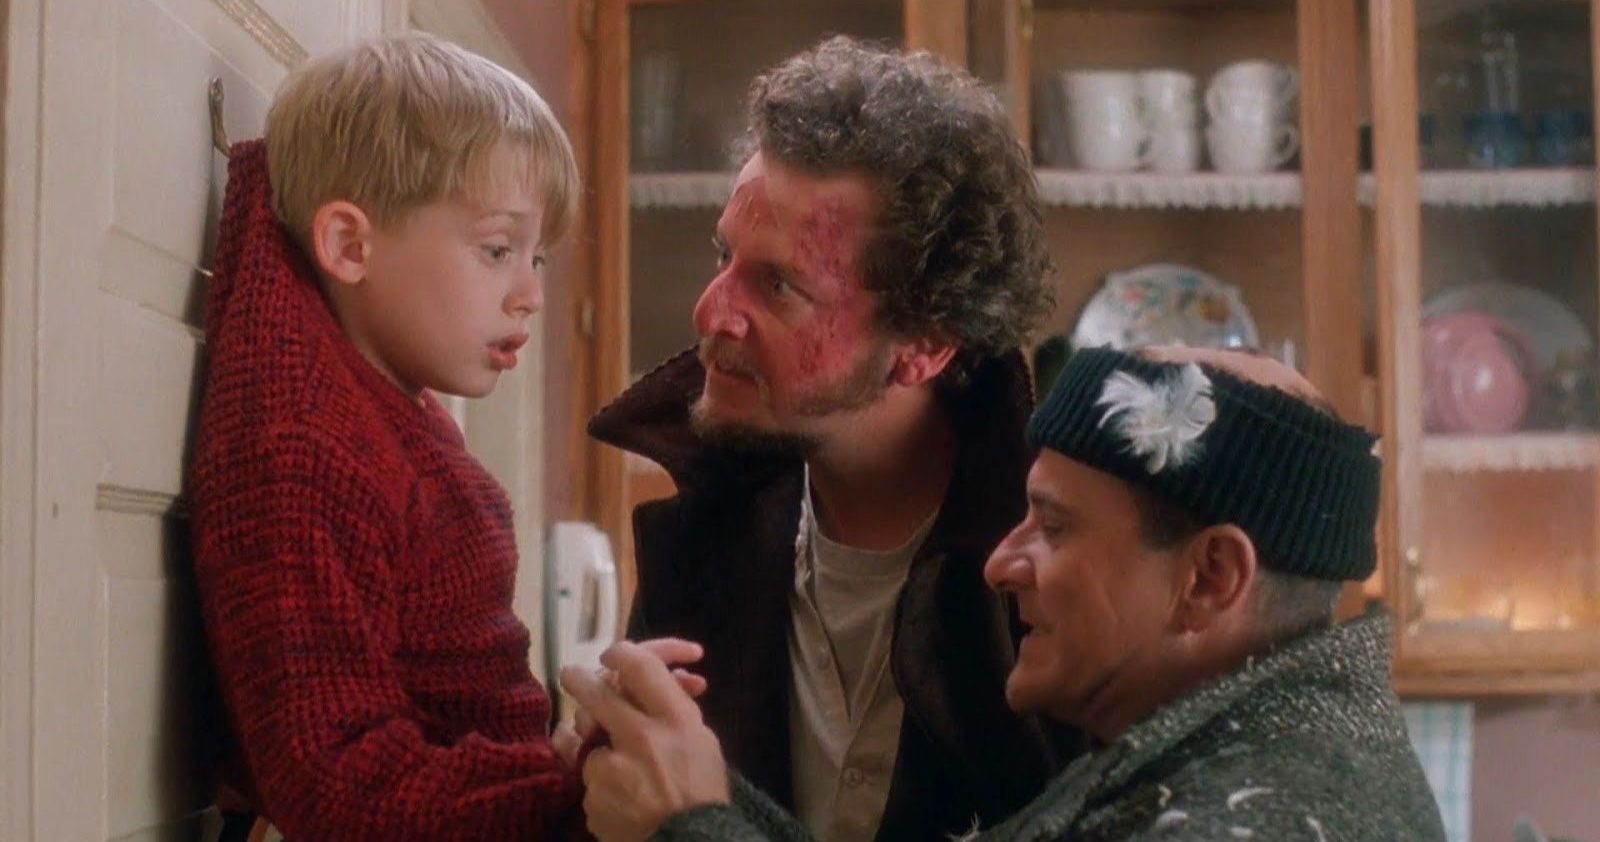 Home Alone Booby Traps Are Completely Legal Argues Defense Attorney